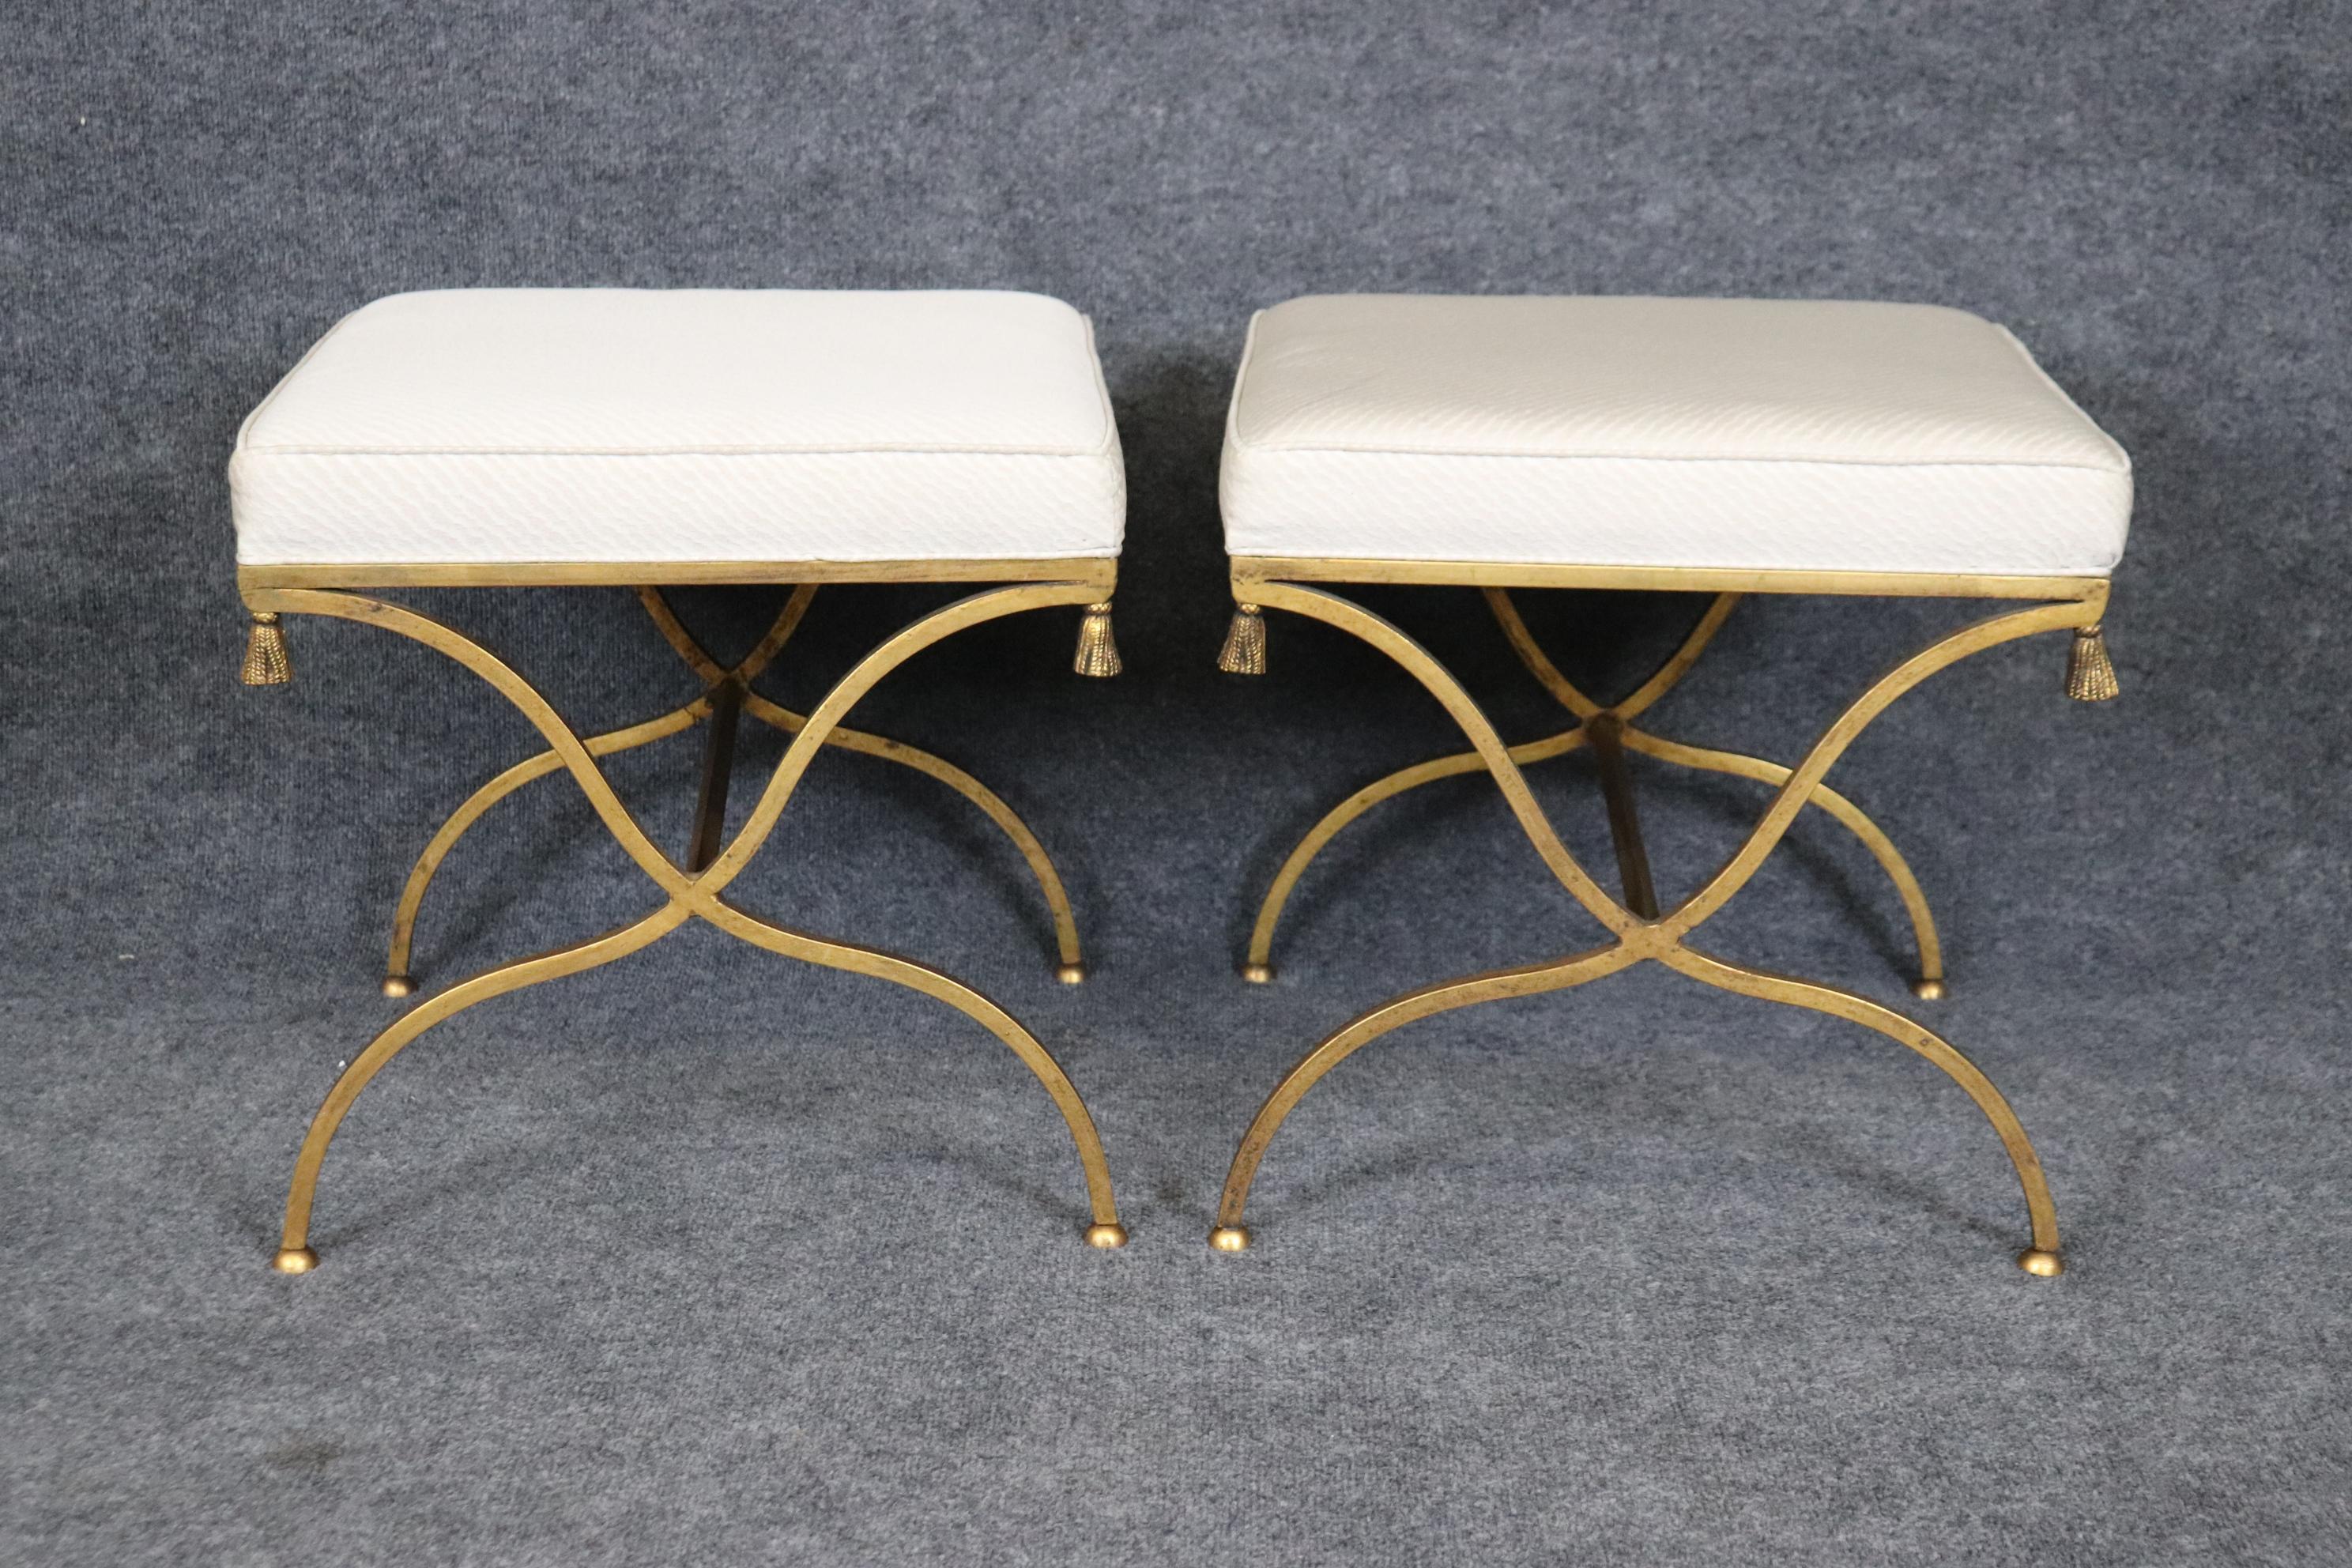 This is a gorgeous pair of benches from the 1950-60s era in the Hollywod Regency style. The benches are in good vintage condition and may show minor wear or minor subtle stains to upholstery not visible in photos. Measures 18 x 18 x 18.25 tall and